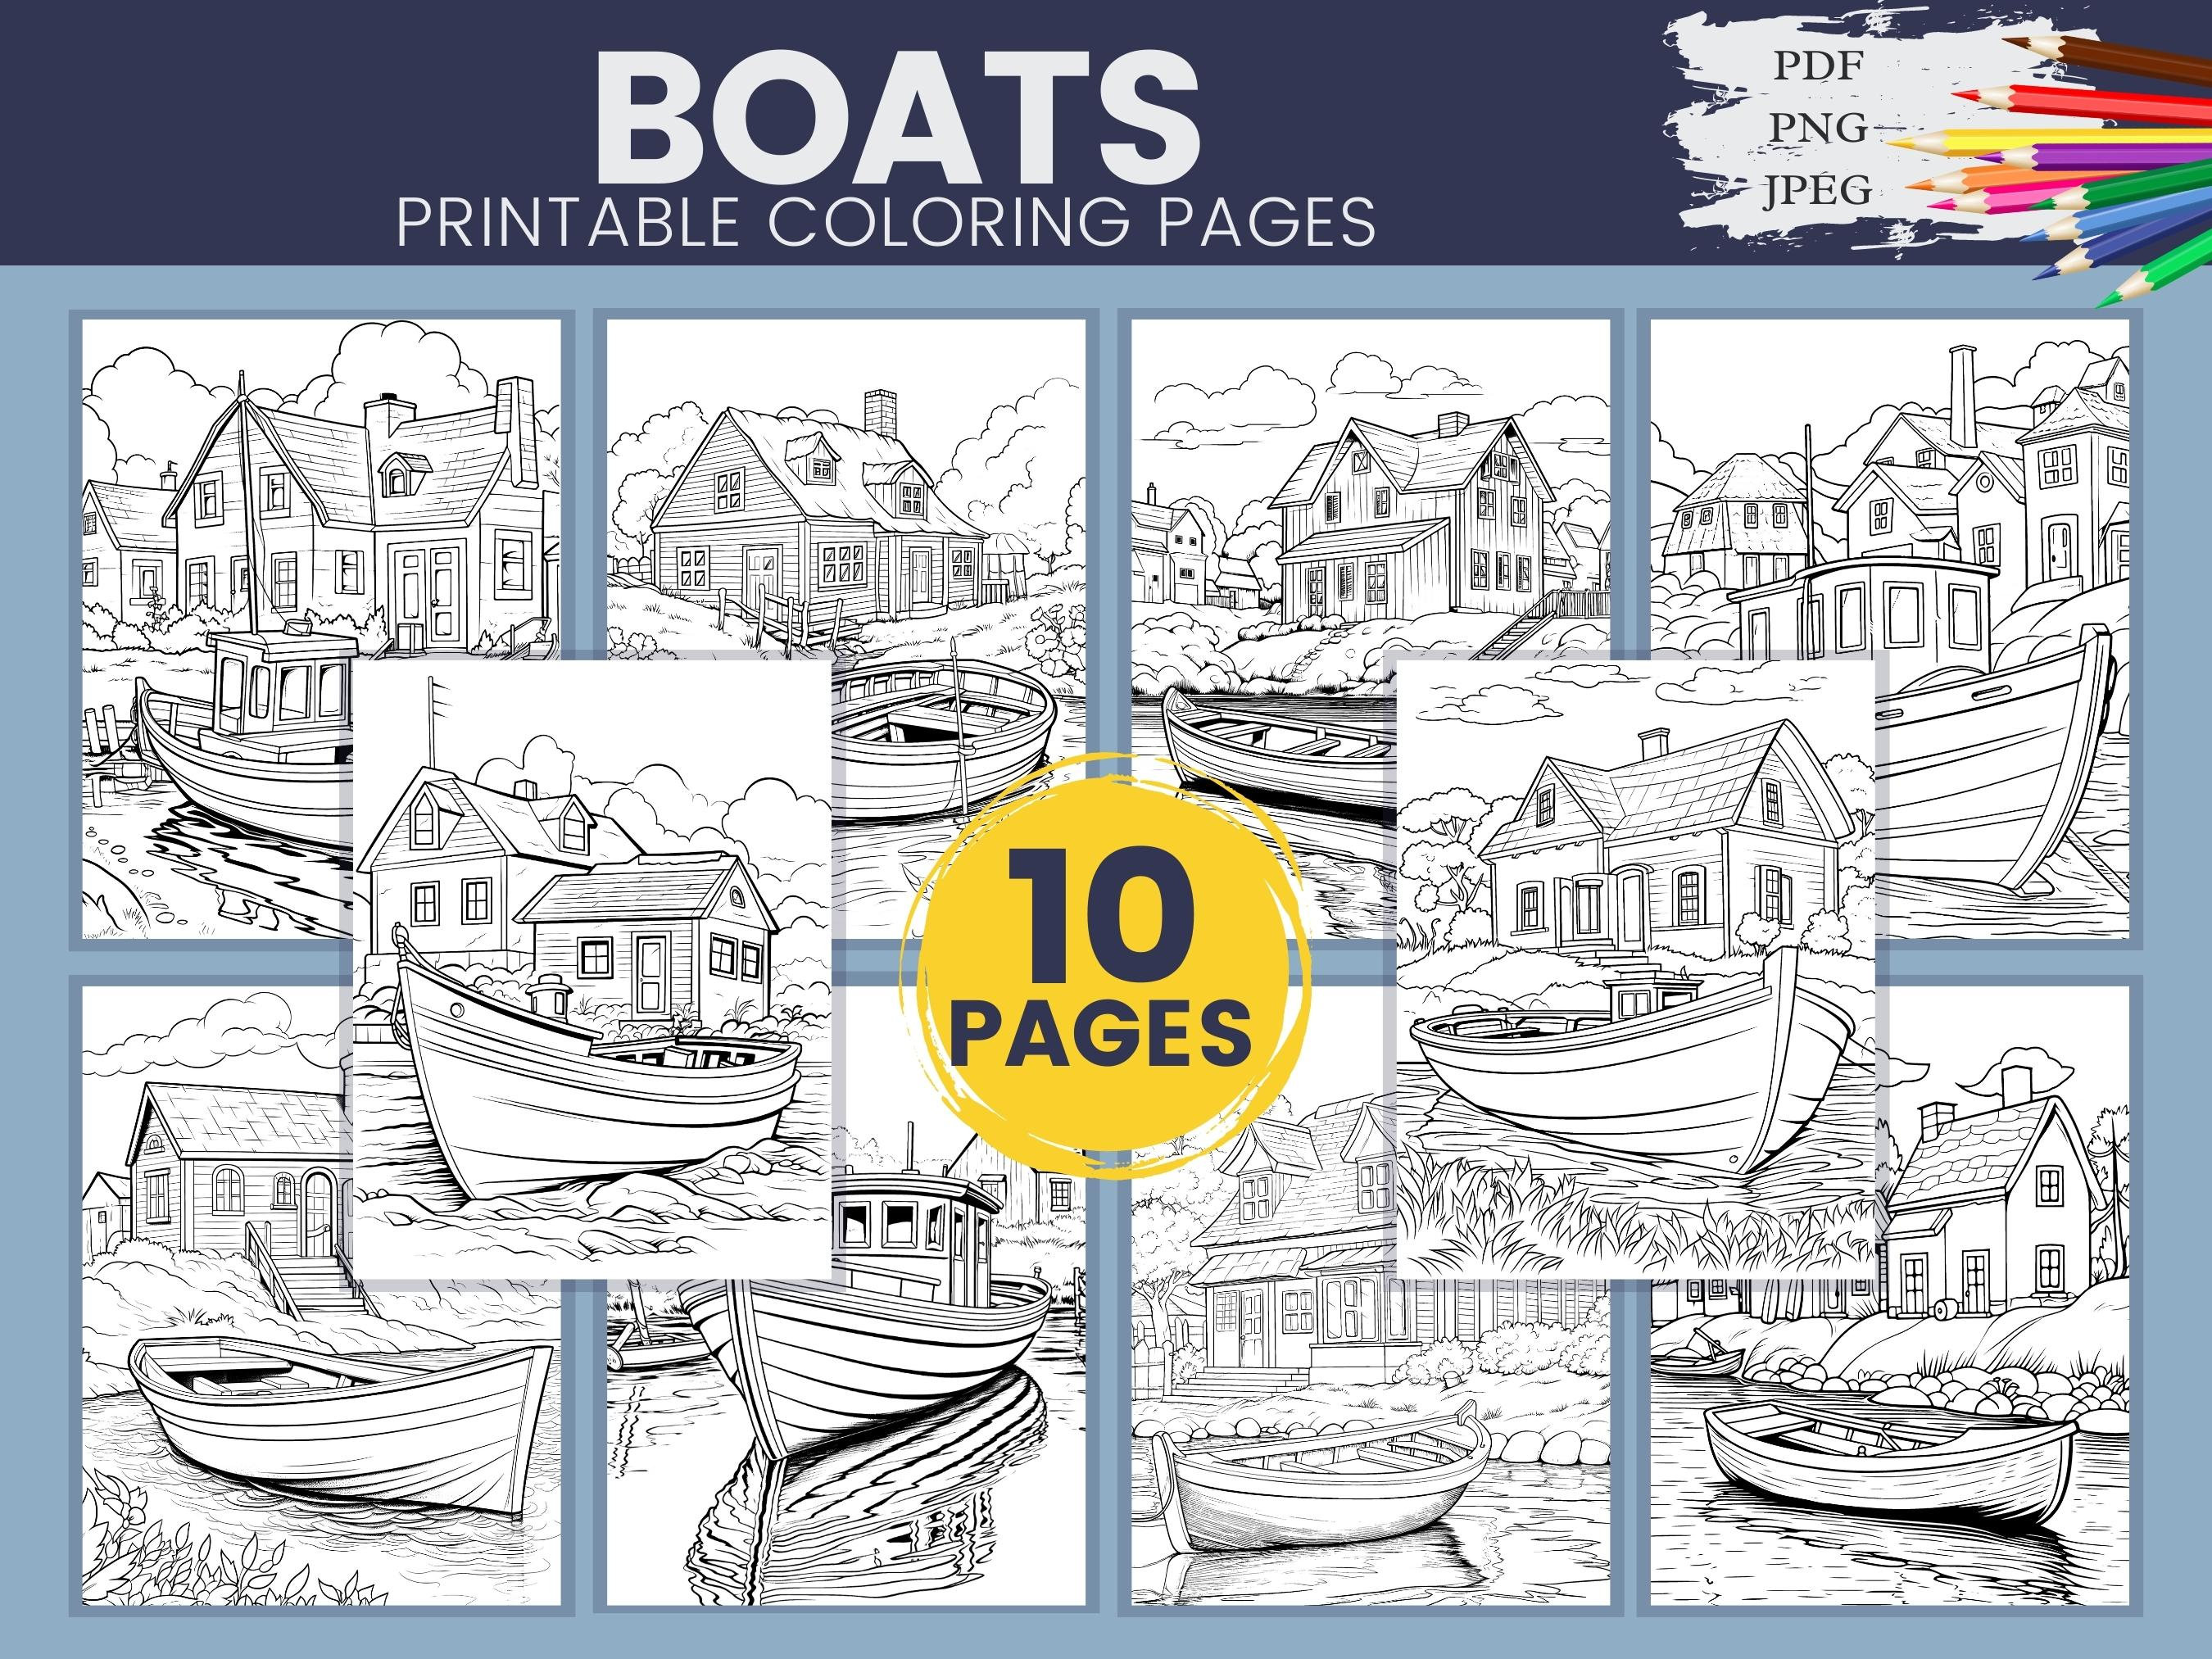 8,000 Coloring Pages For All Ages (Free PDF Printables)